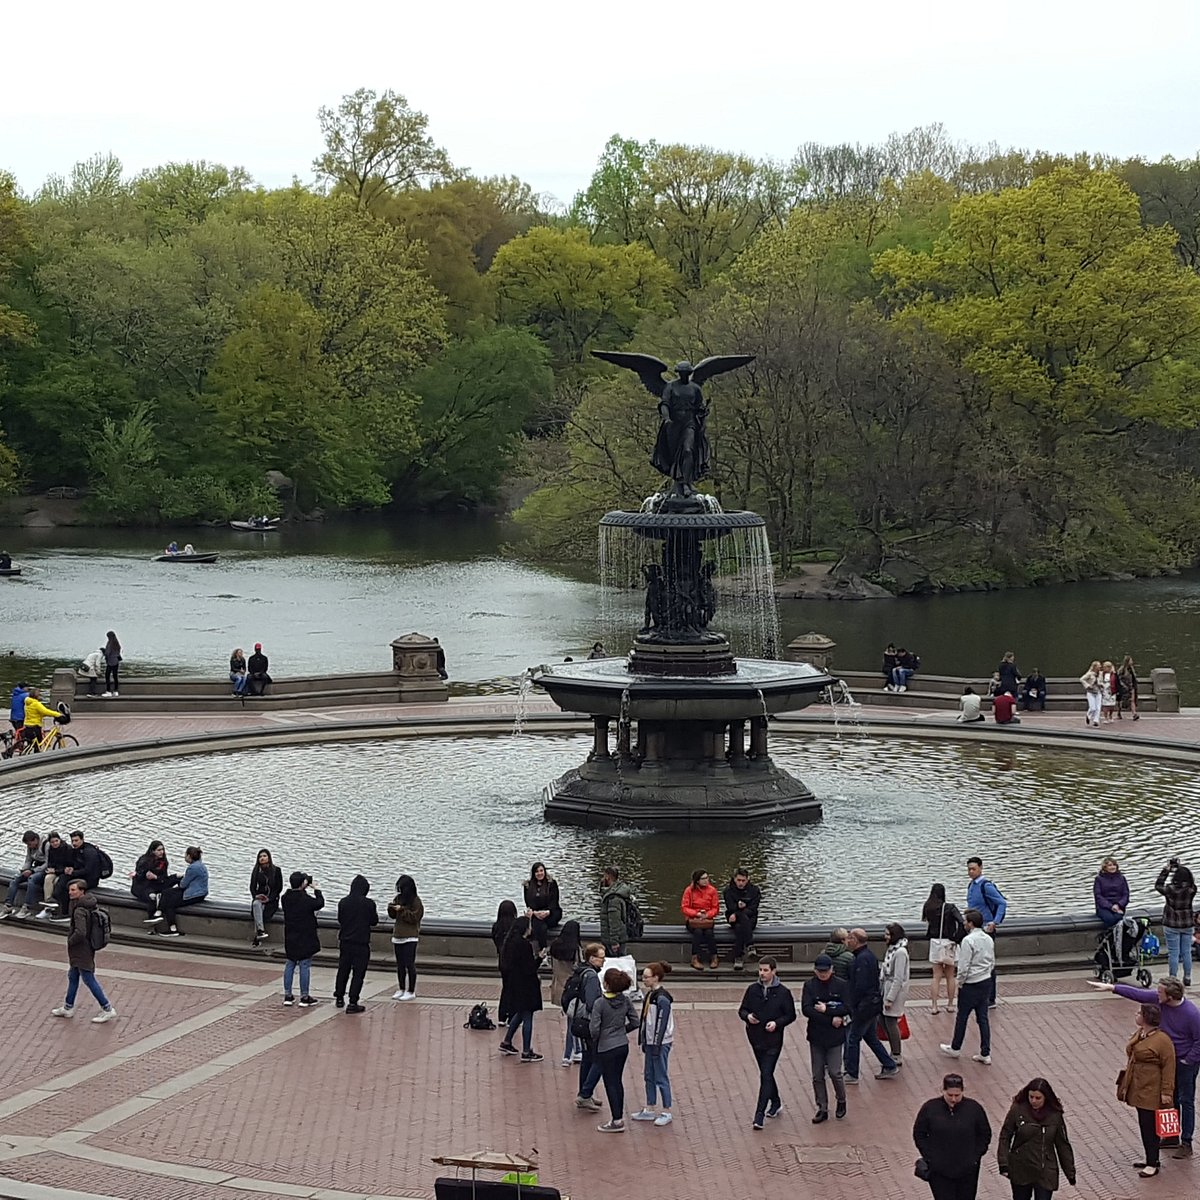 Bethesda Fountain in Central Park - New York City Photography